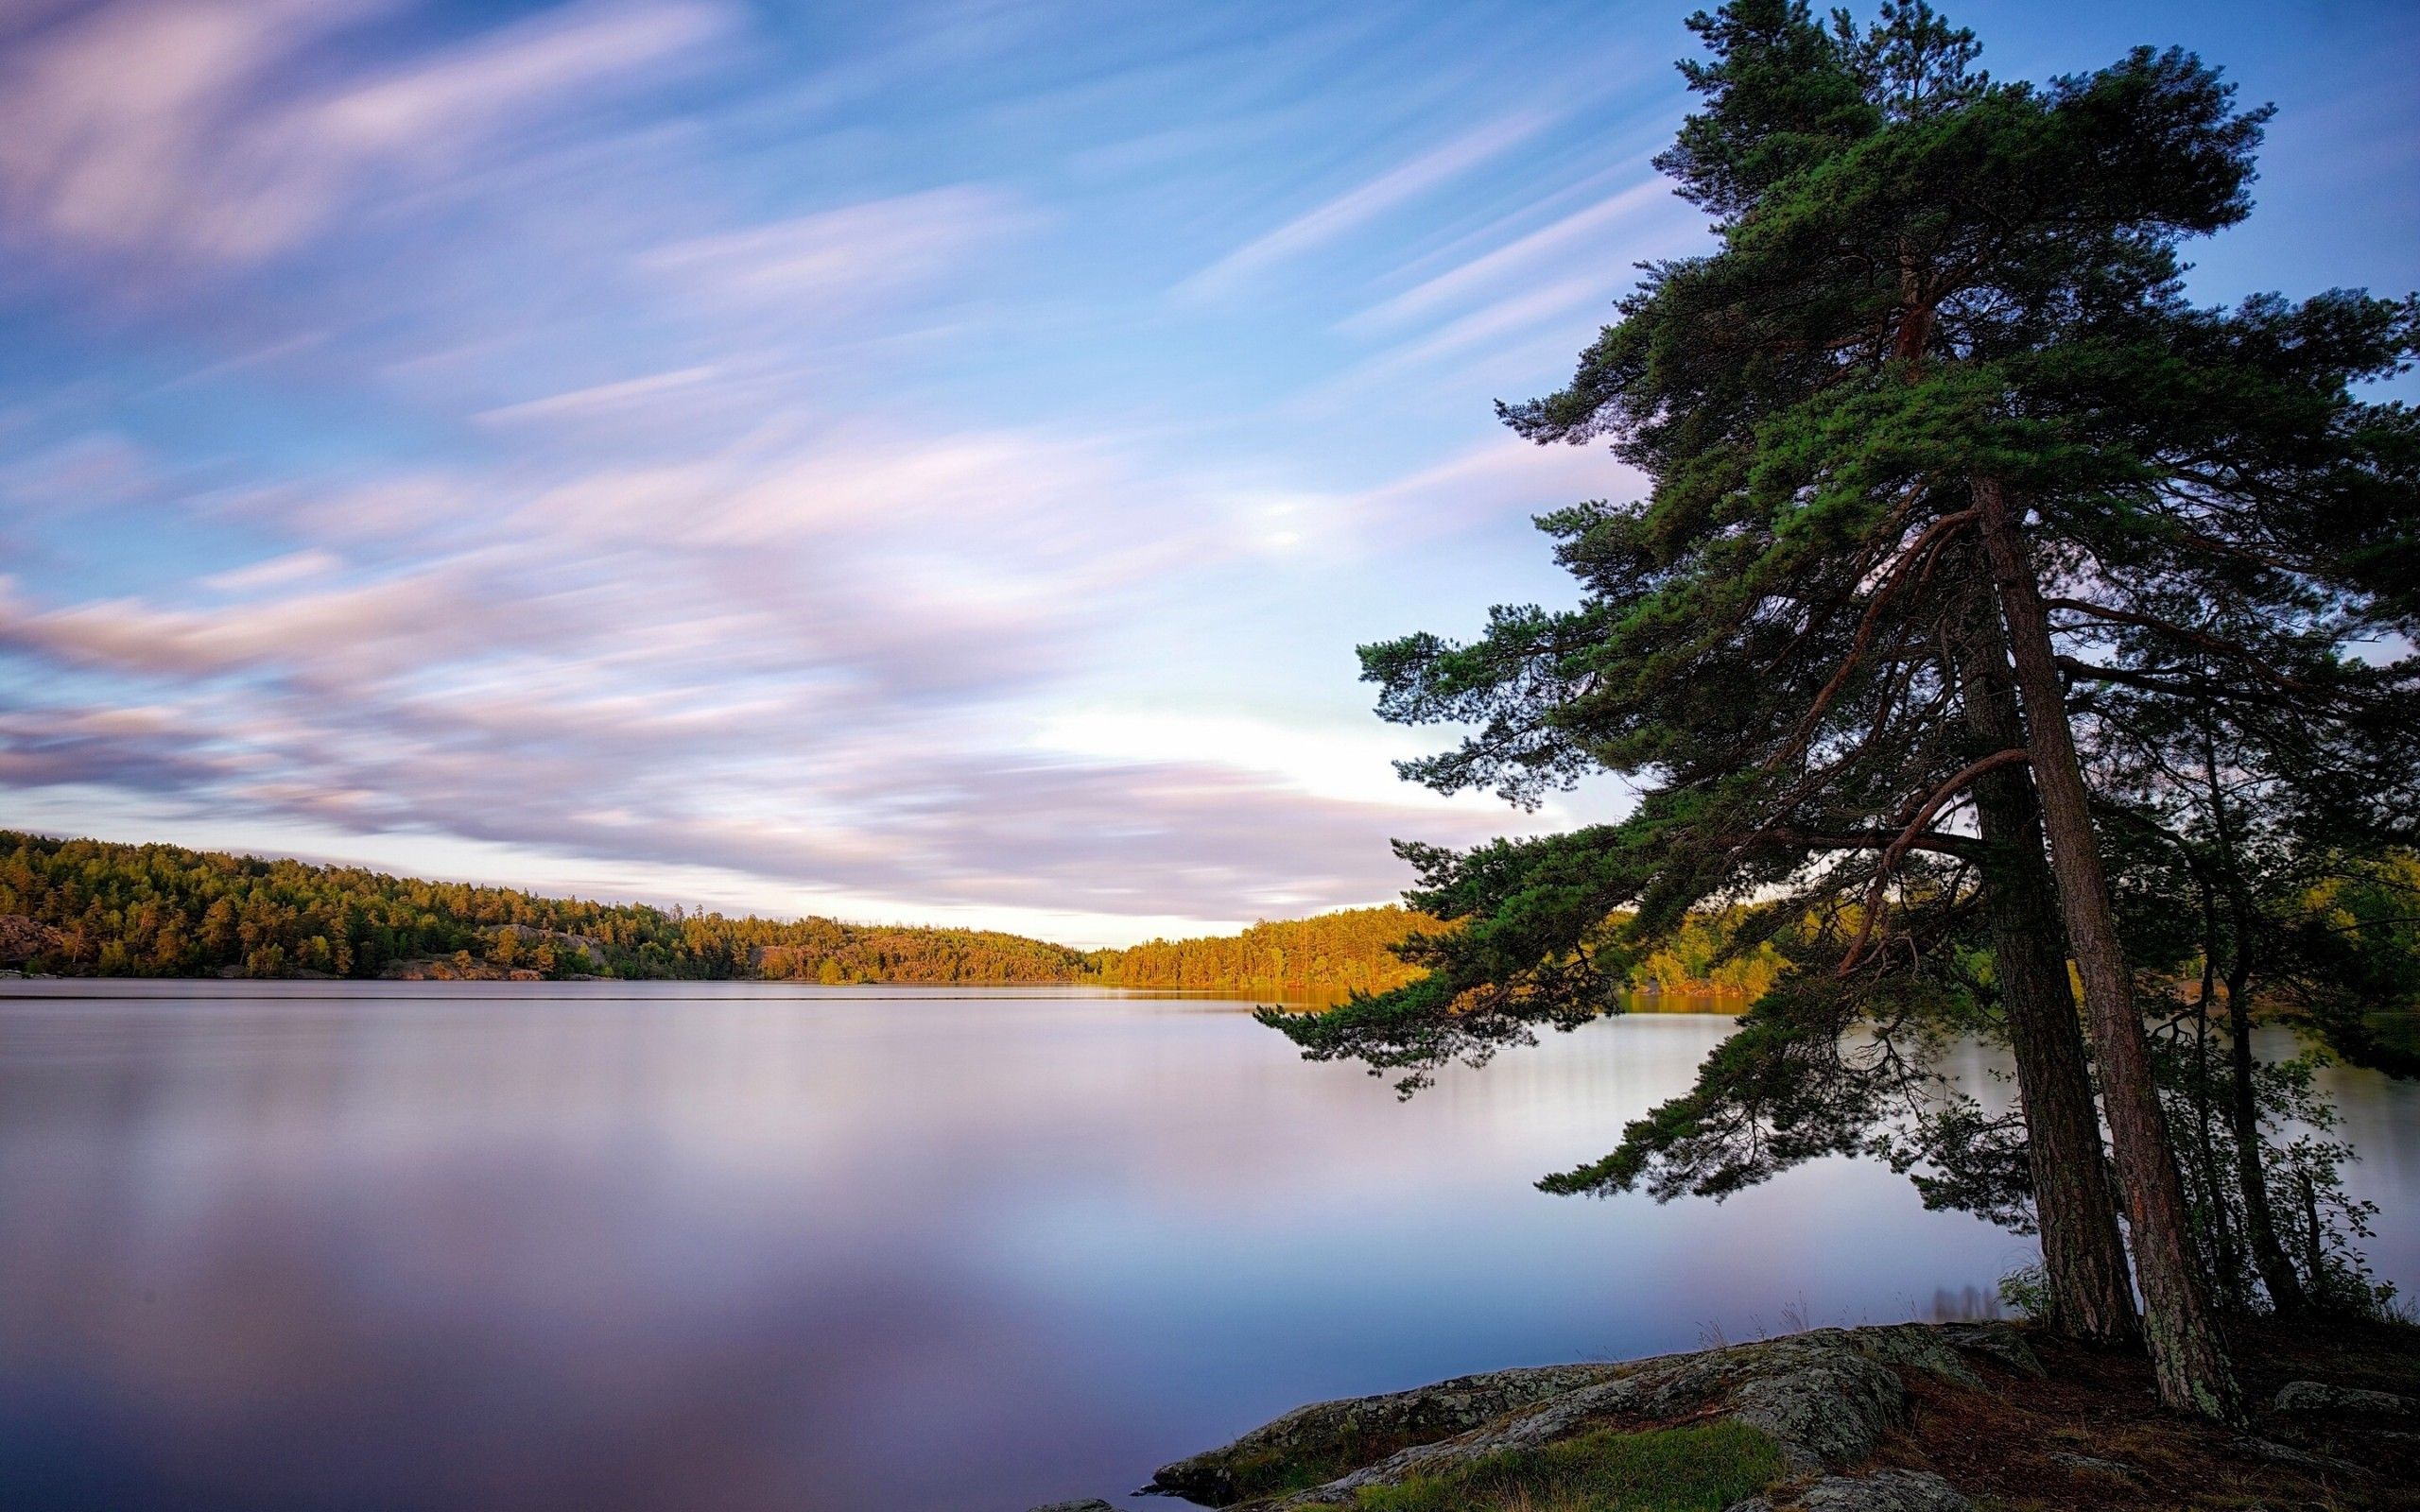 Download 2560x1600 Lake, Tree, Reflection, Sweden, Autumn, Trees